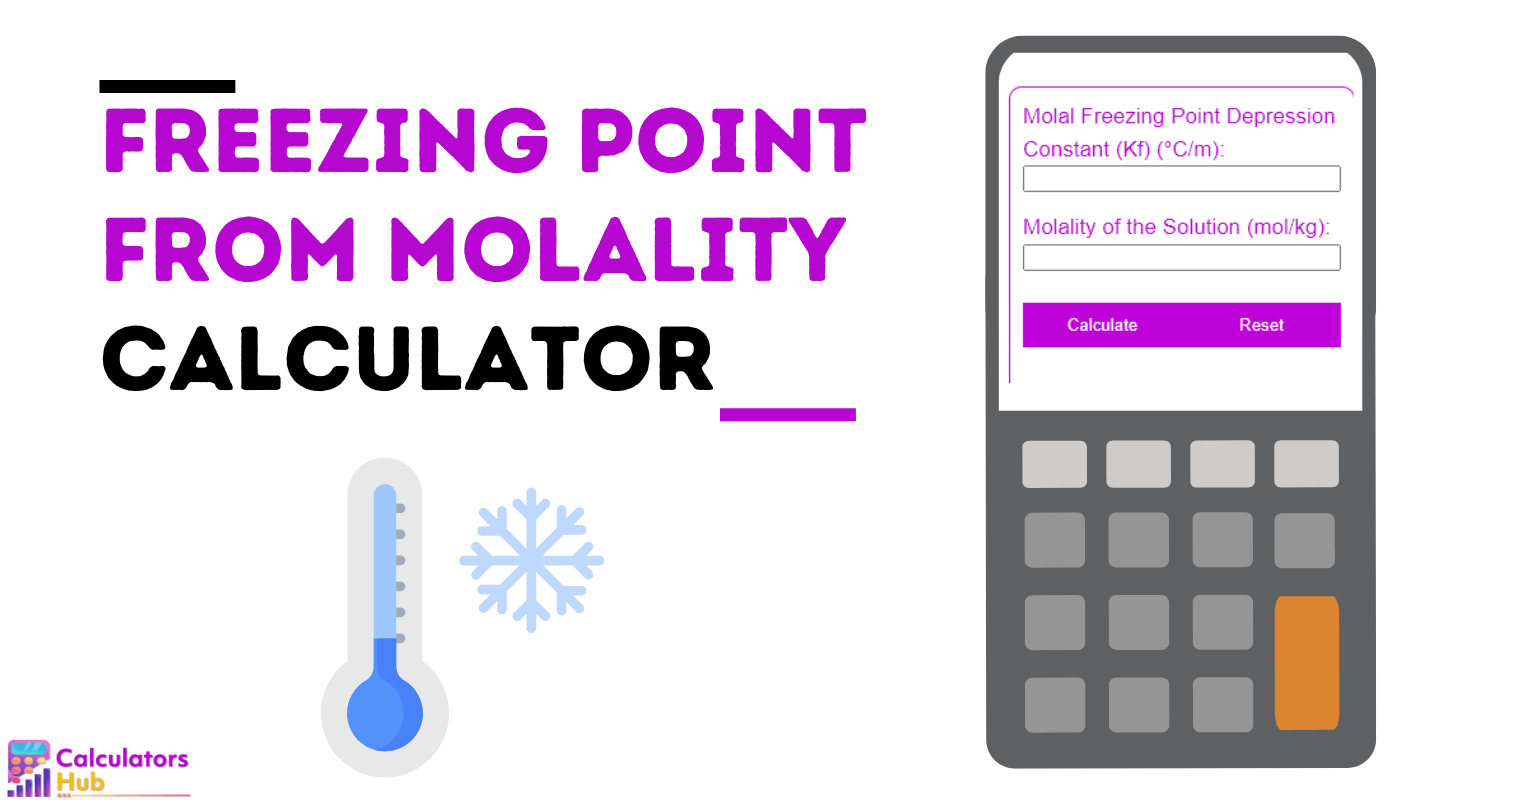 Freezing Point from Molality Calculator